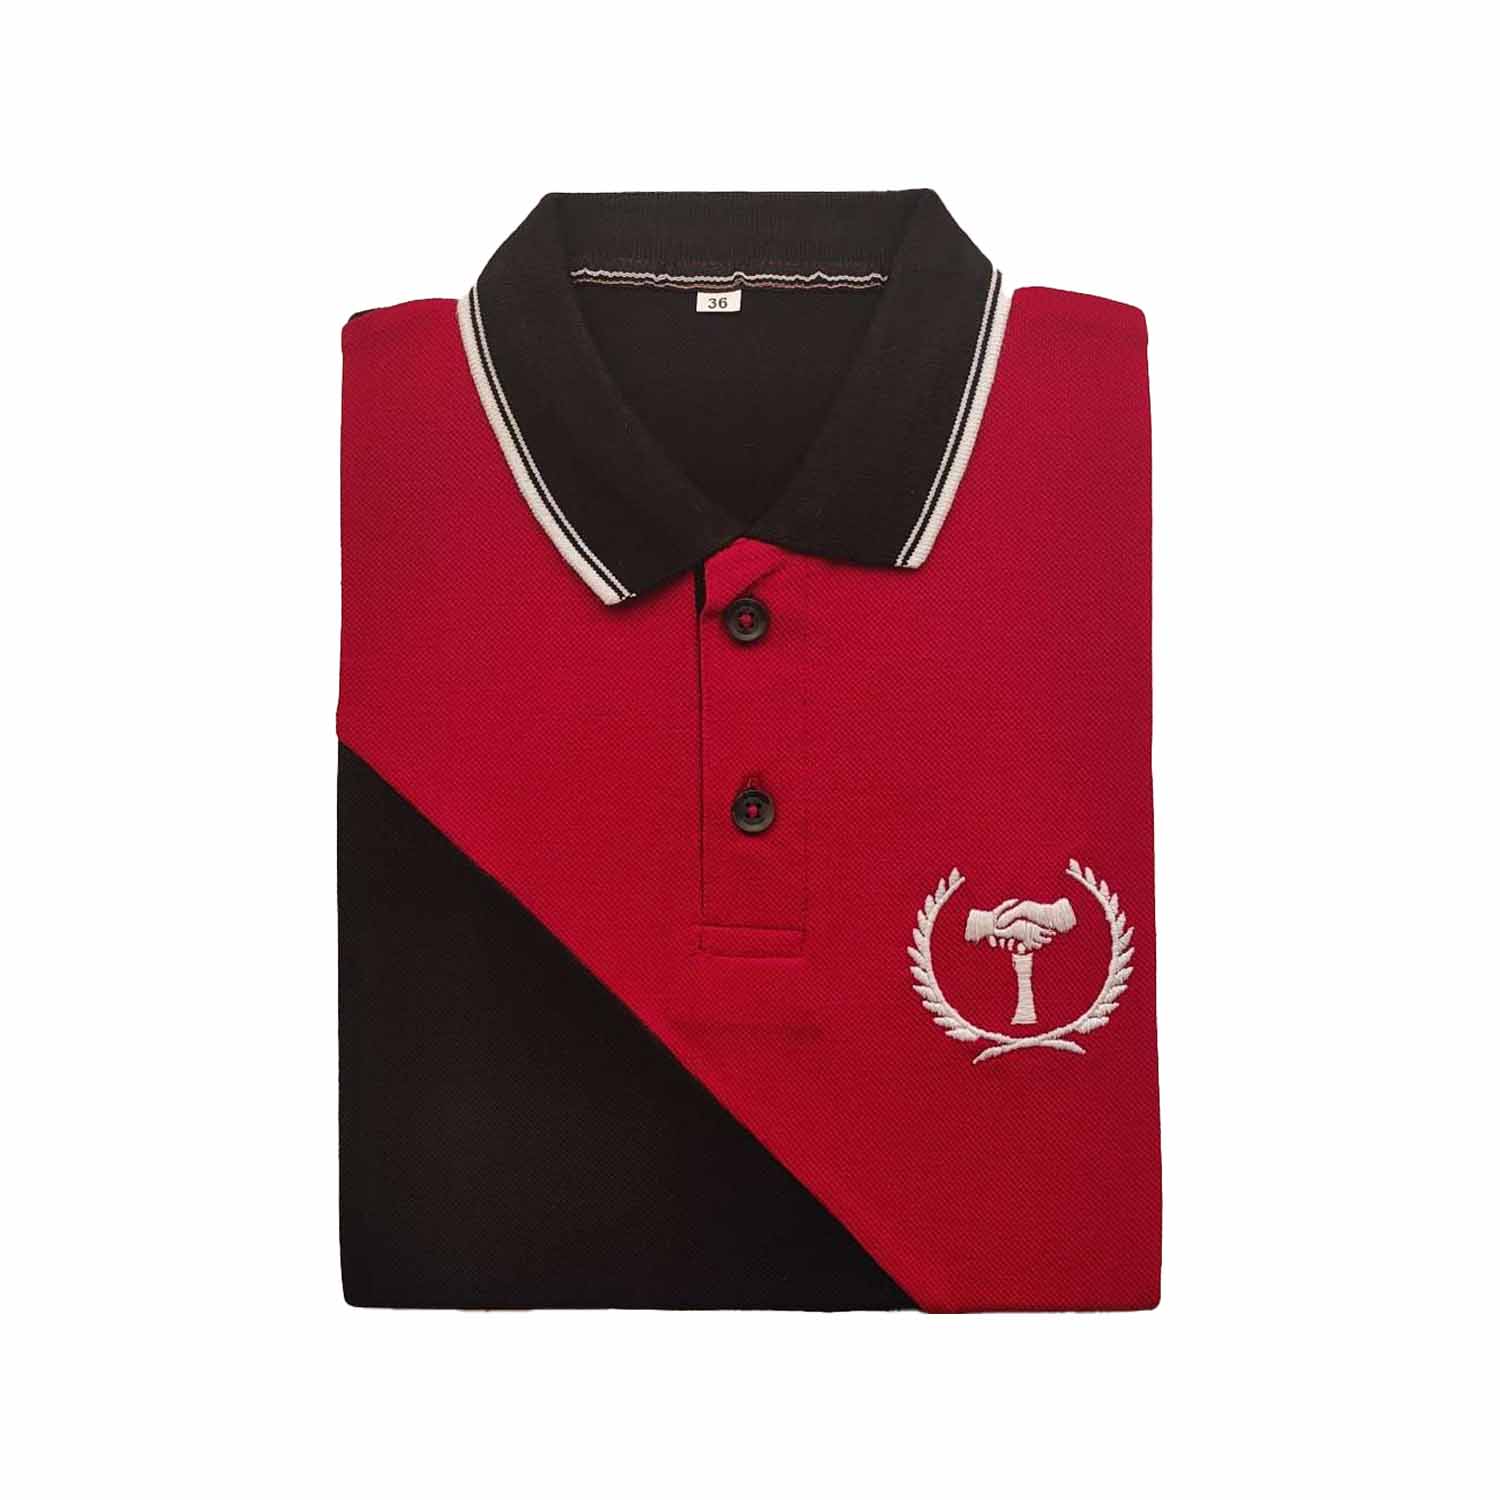 Black & Red Polo T-shirt (S-38)